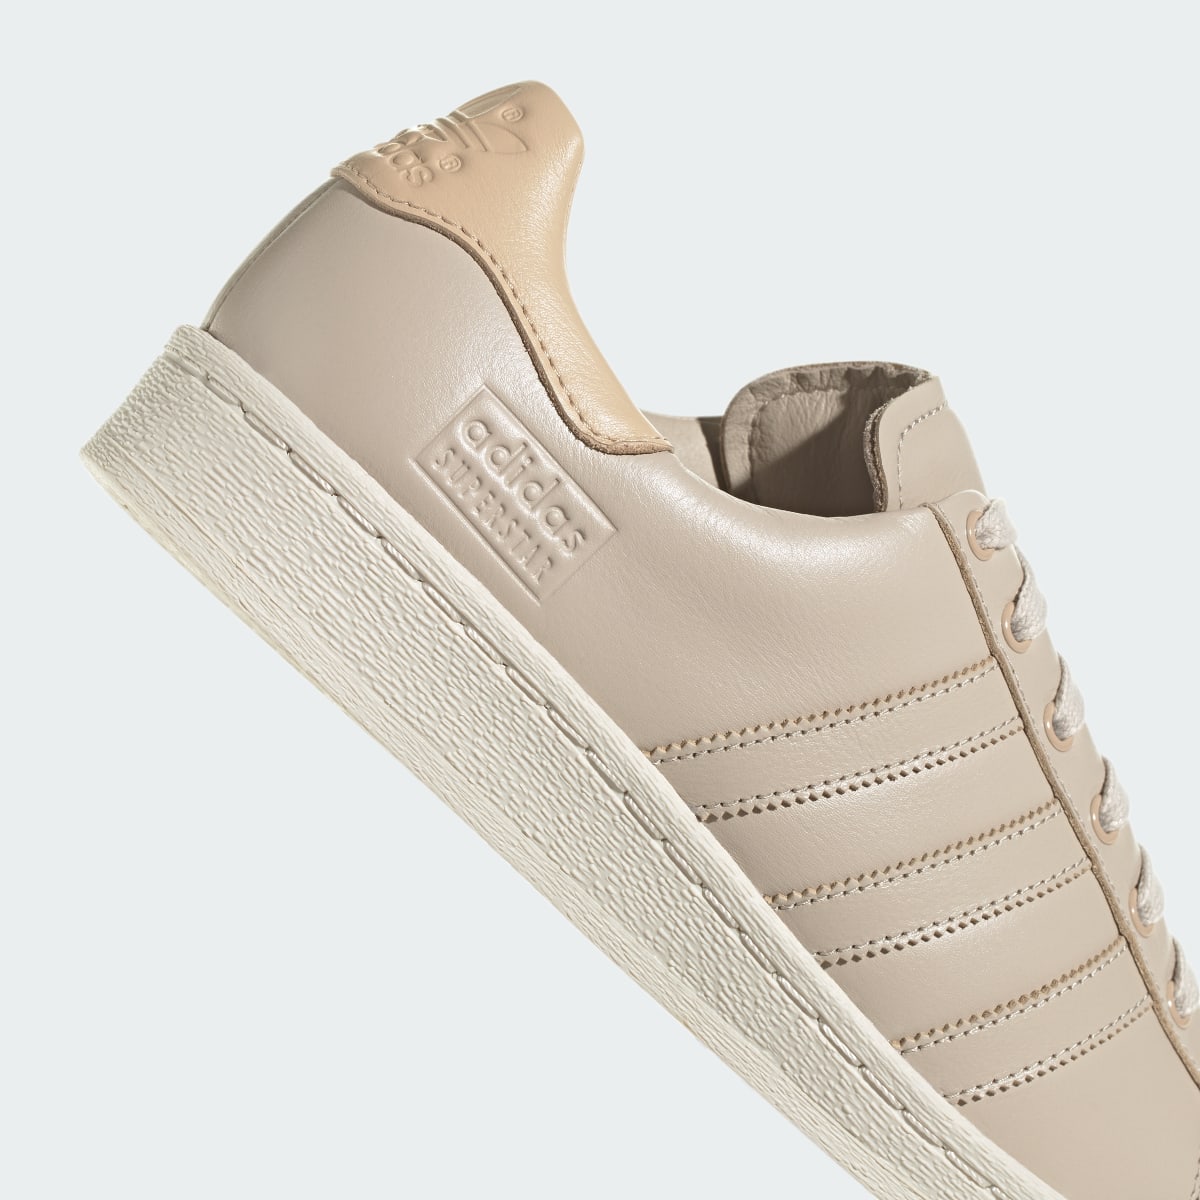 Adidas Superstar Lux Shoes. 10